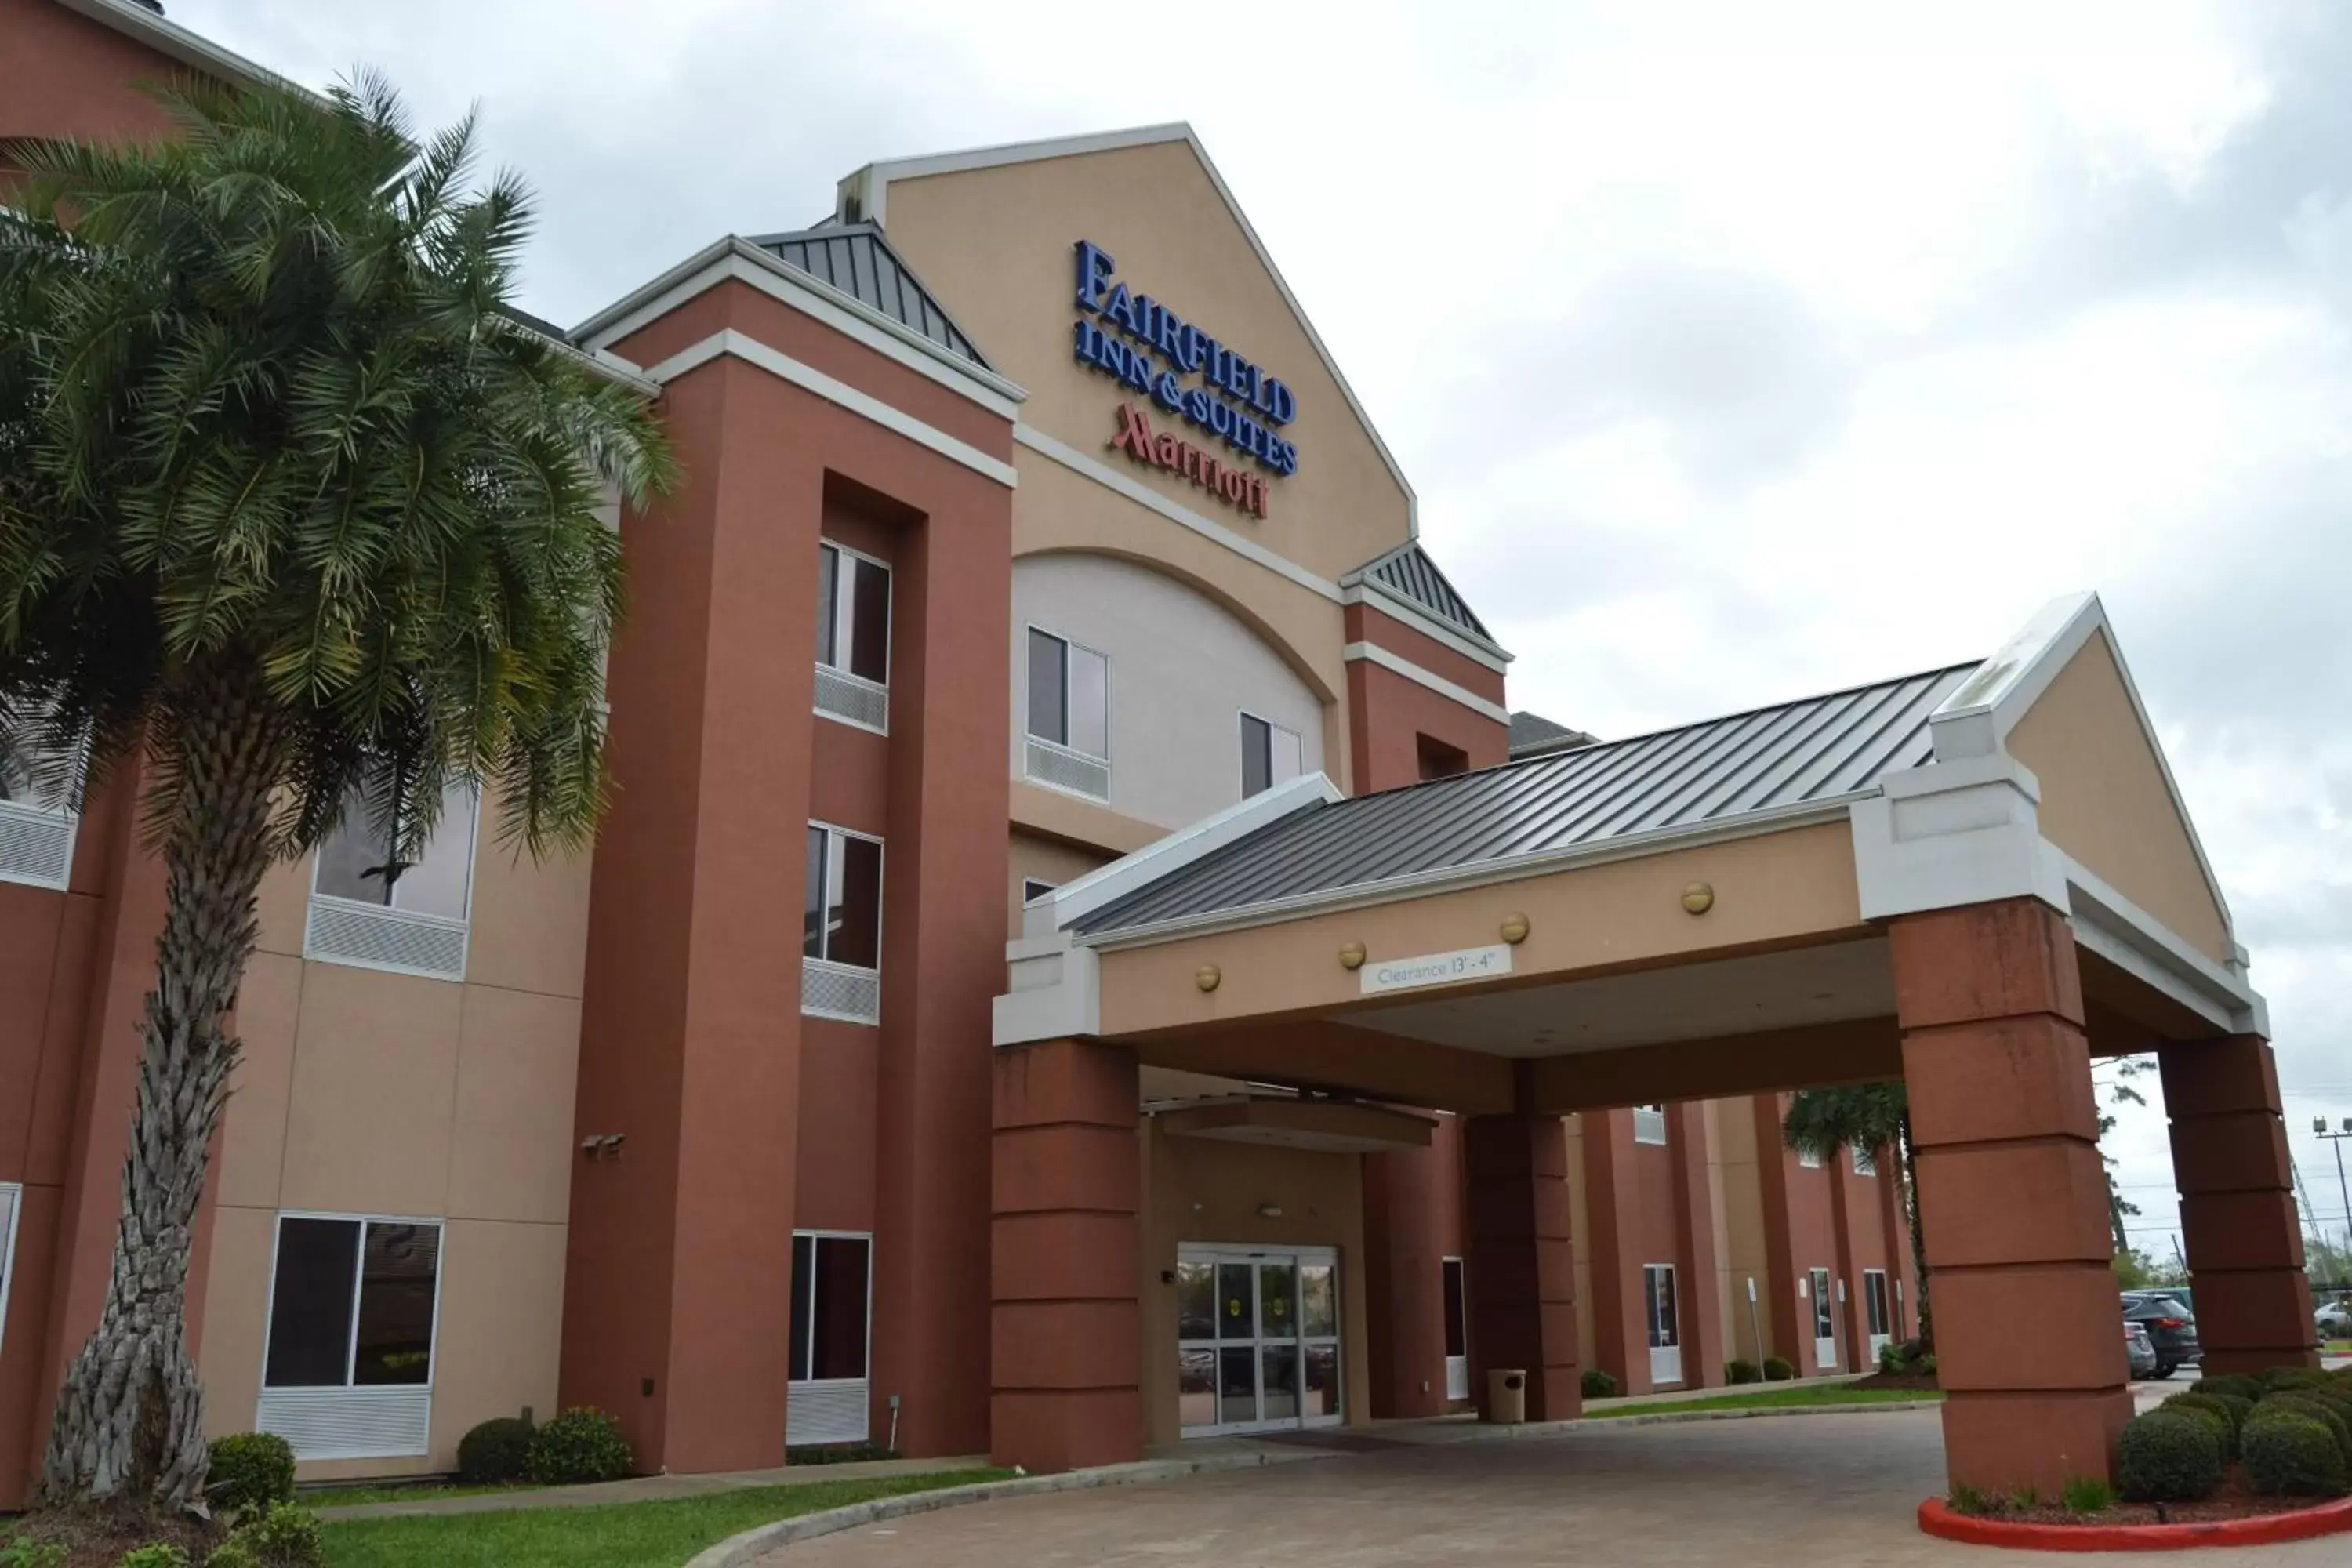 Property Building in Fairfield Inn & Suites Houston Channelview